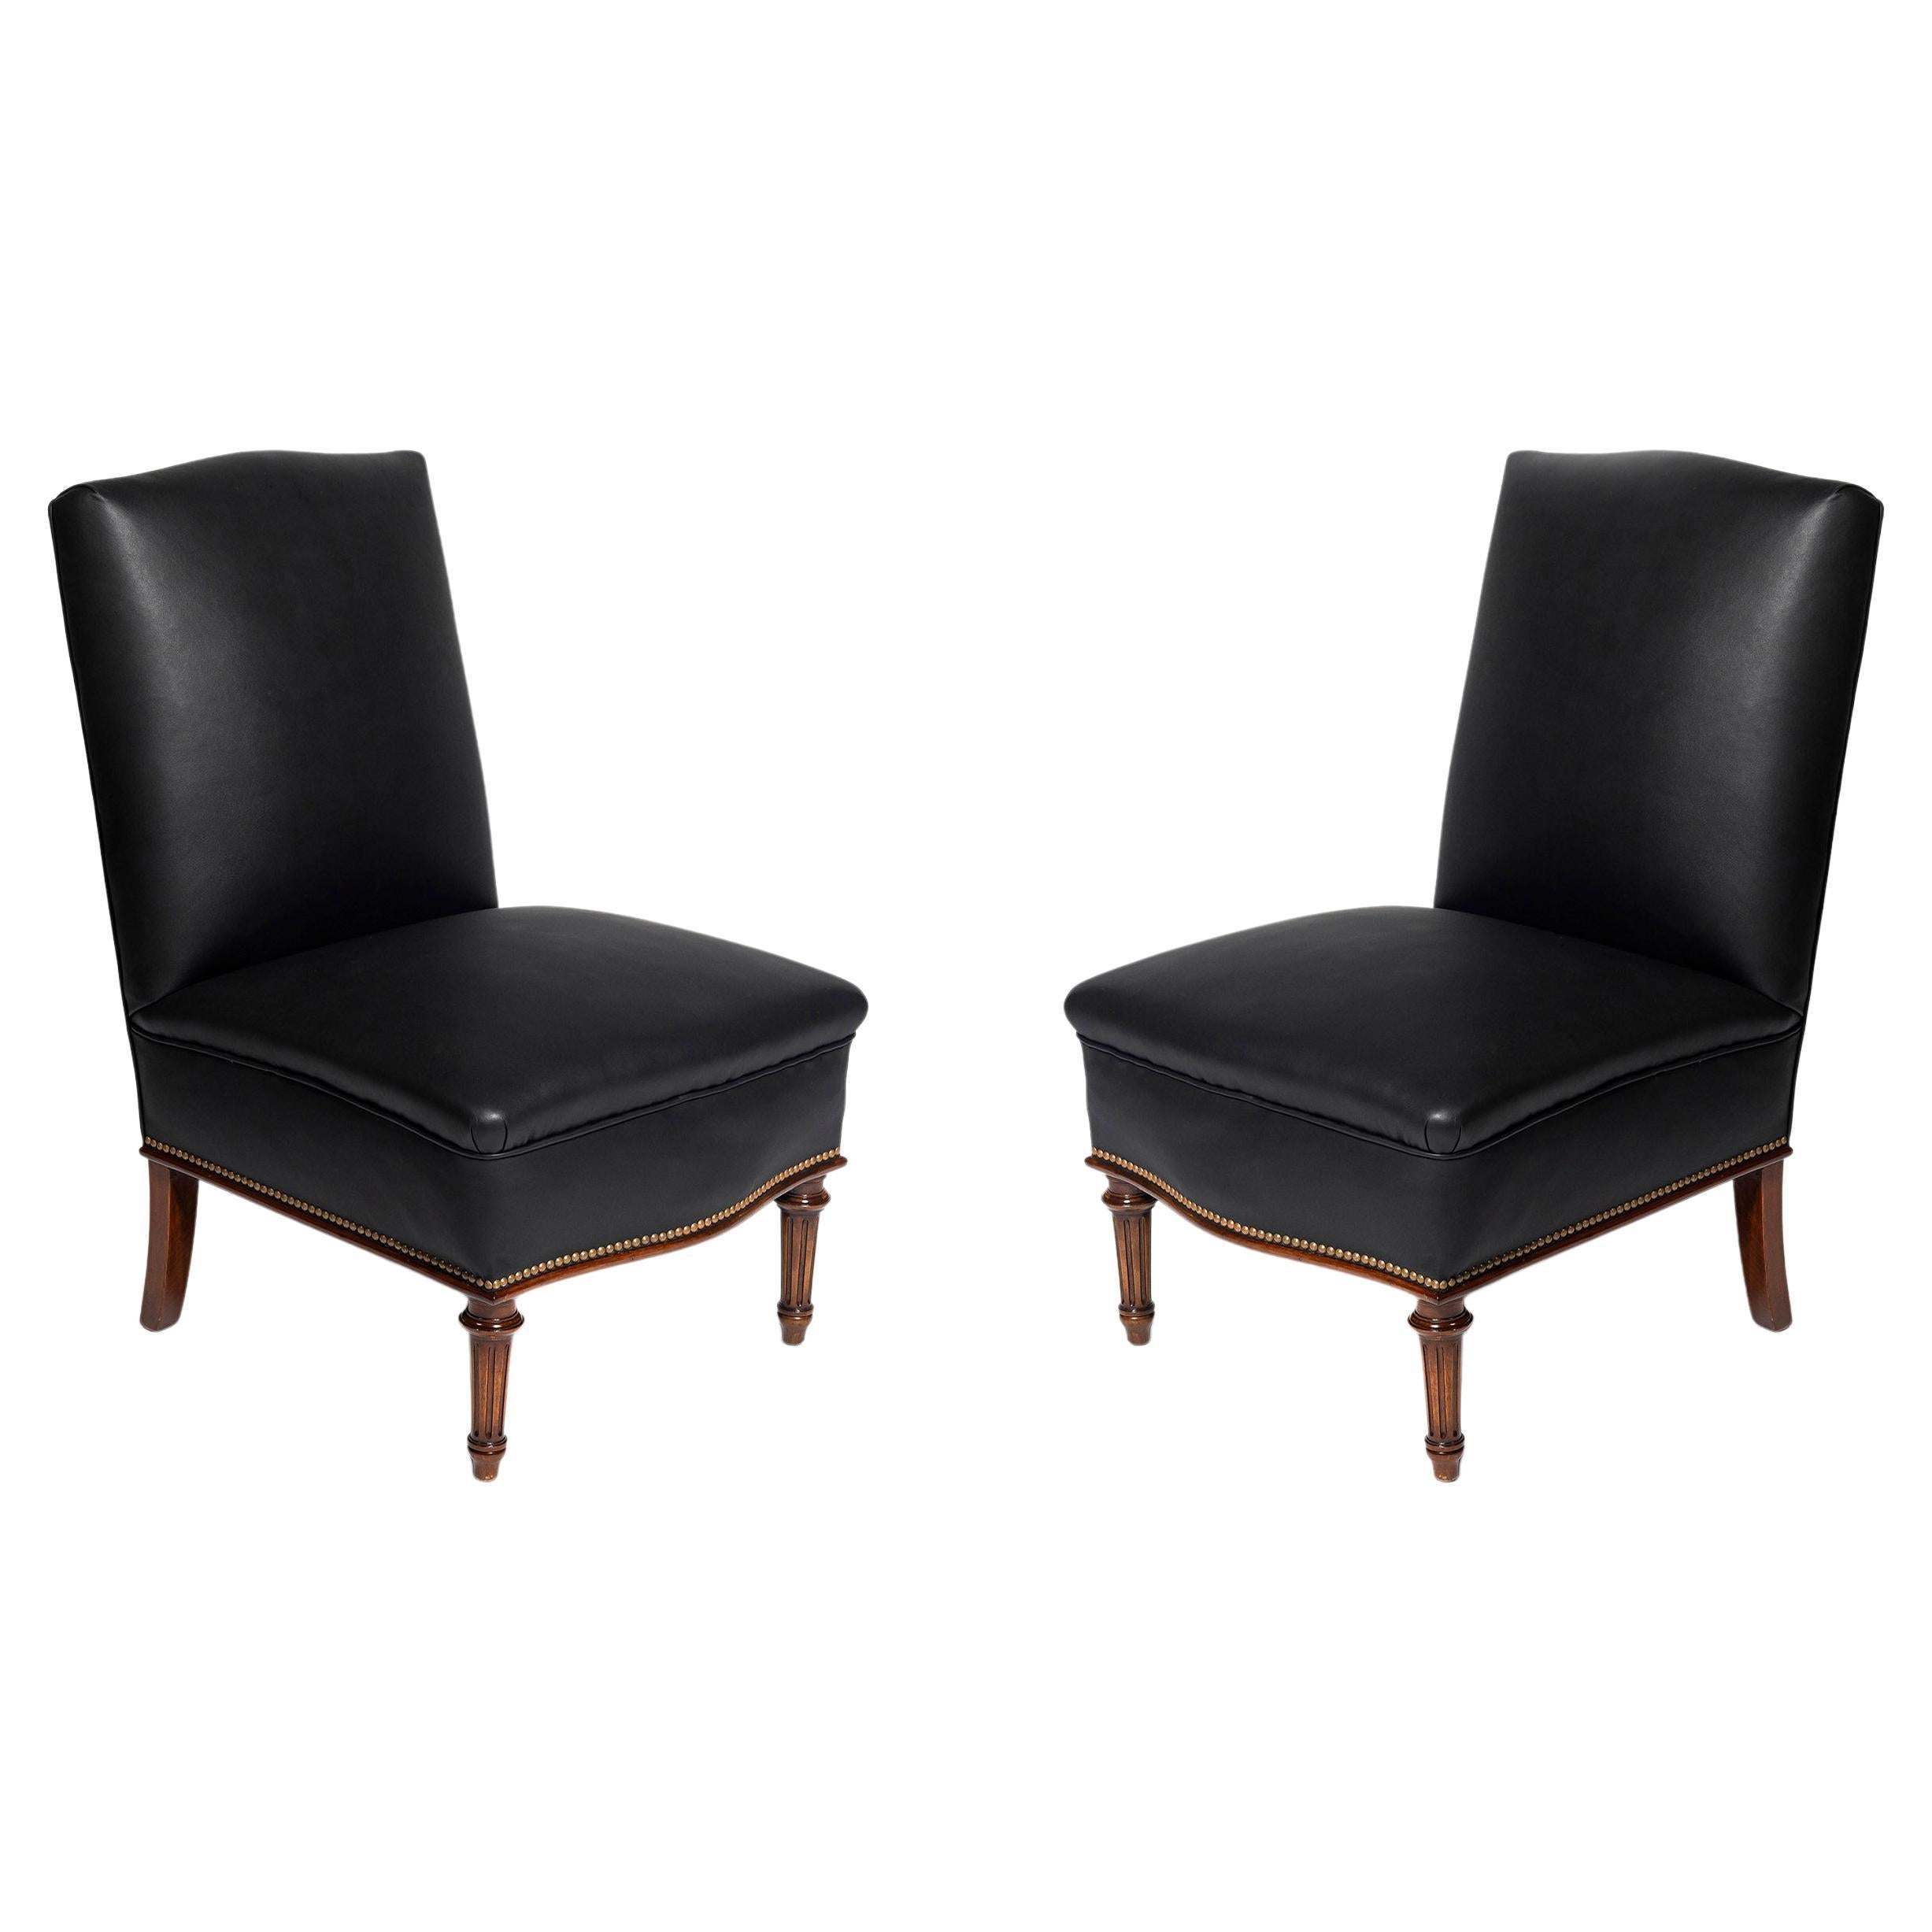 Pair of Wood and Leather Slipper Chairs by Comte, Argentina, circa 1940 For Sale